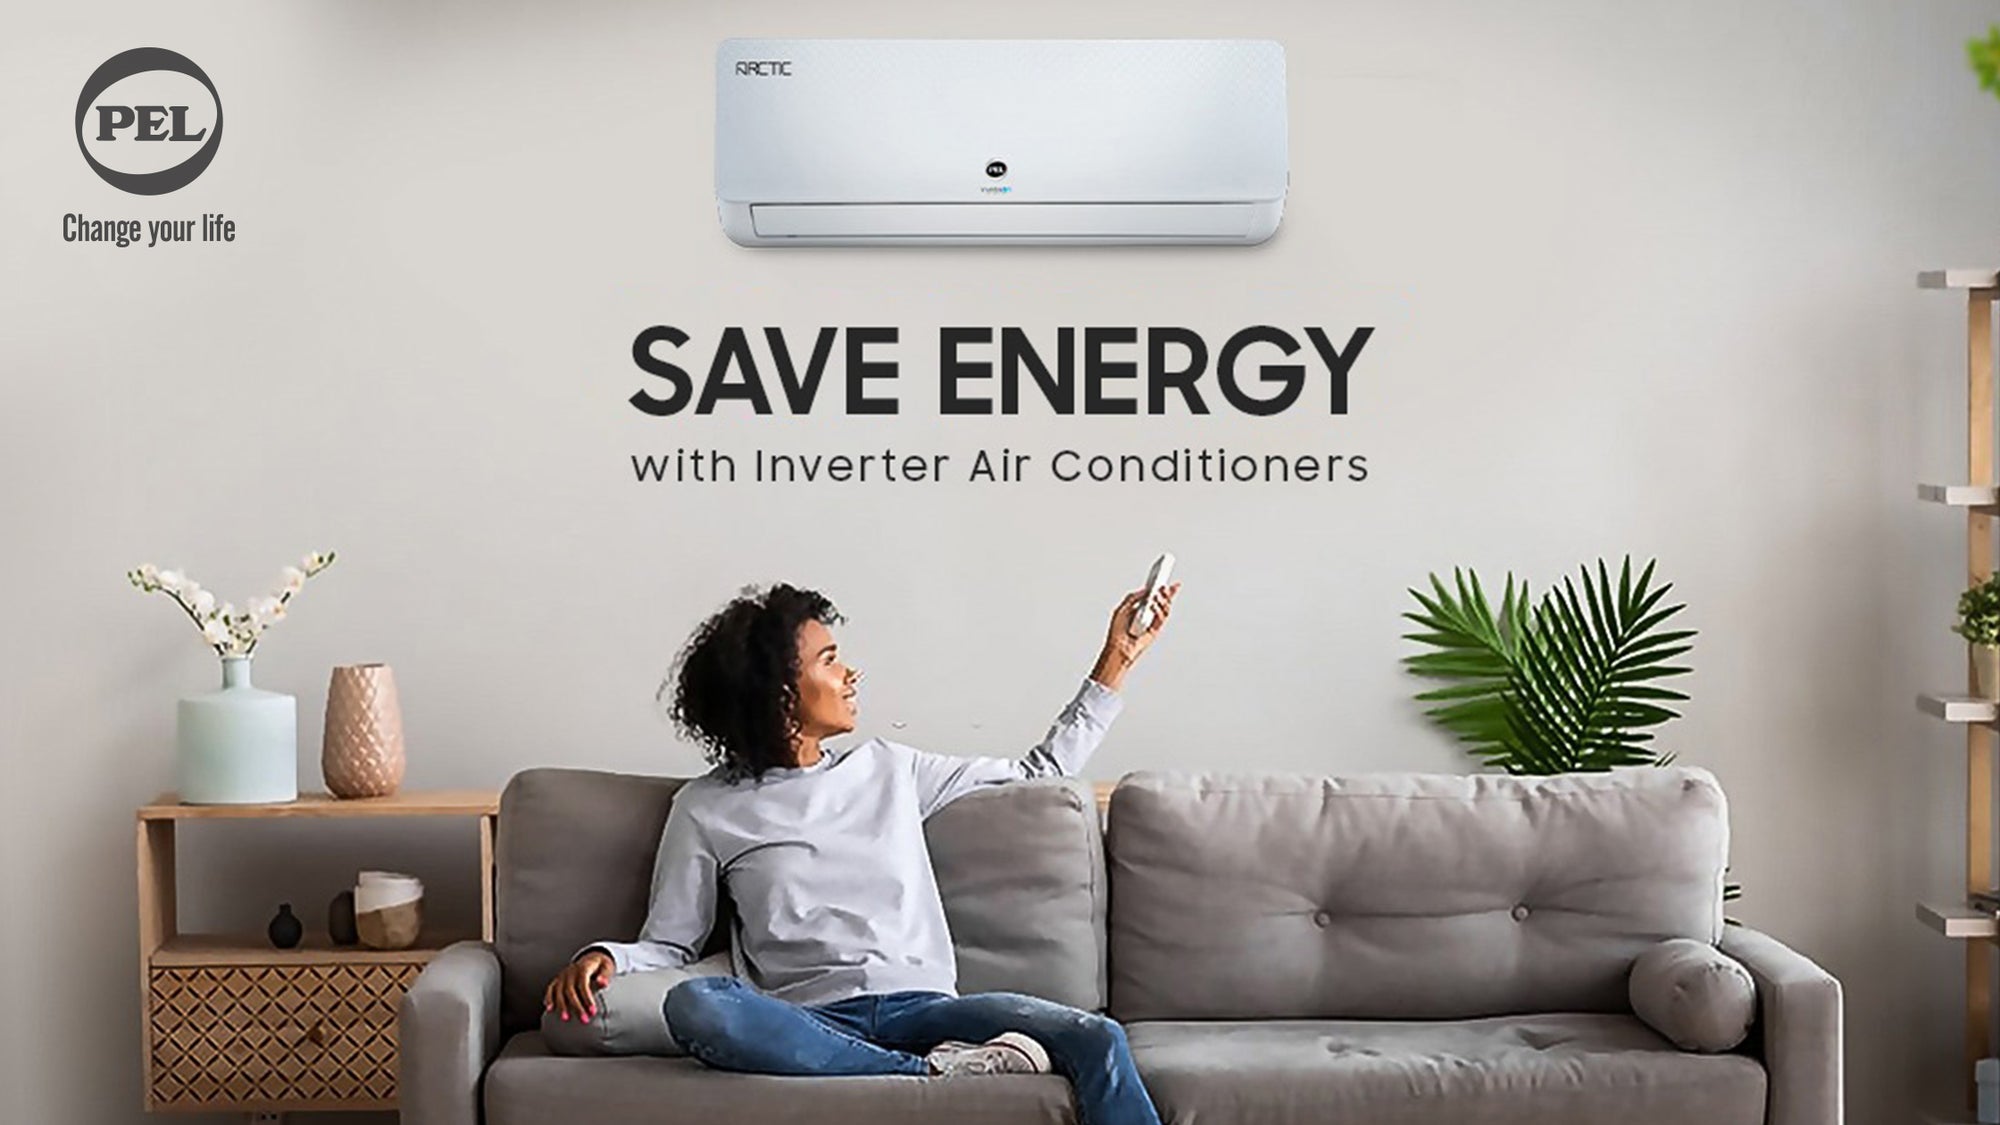 What Are the Major Advantages of Inverter Air Conditioners?